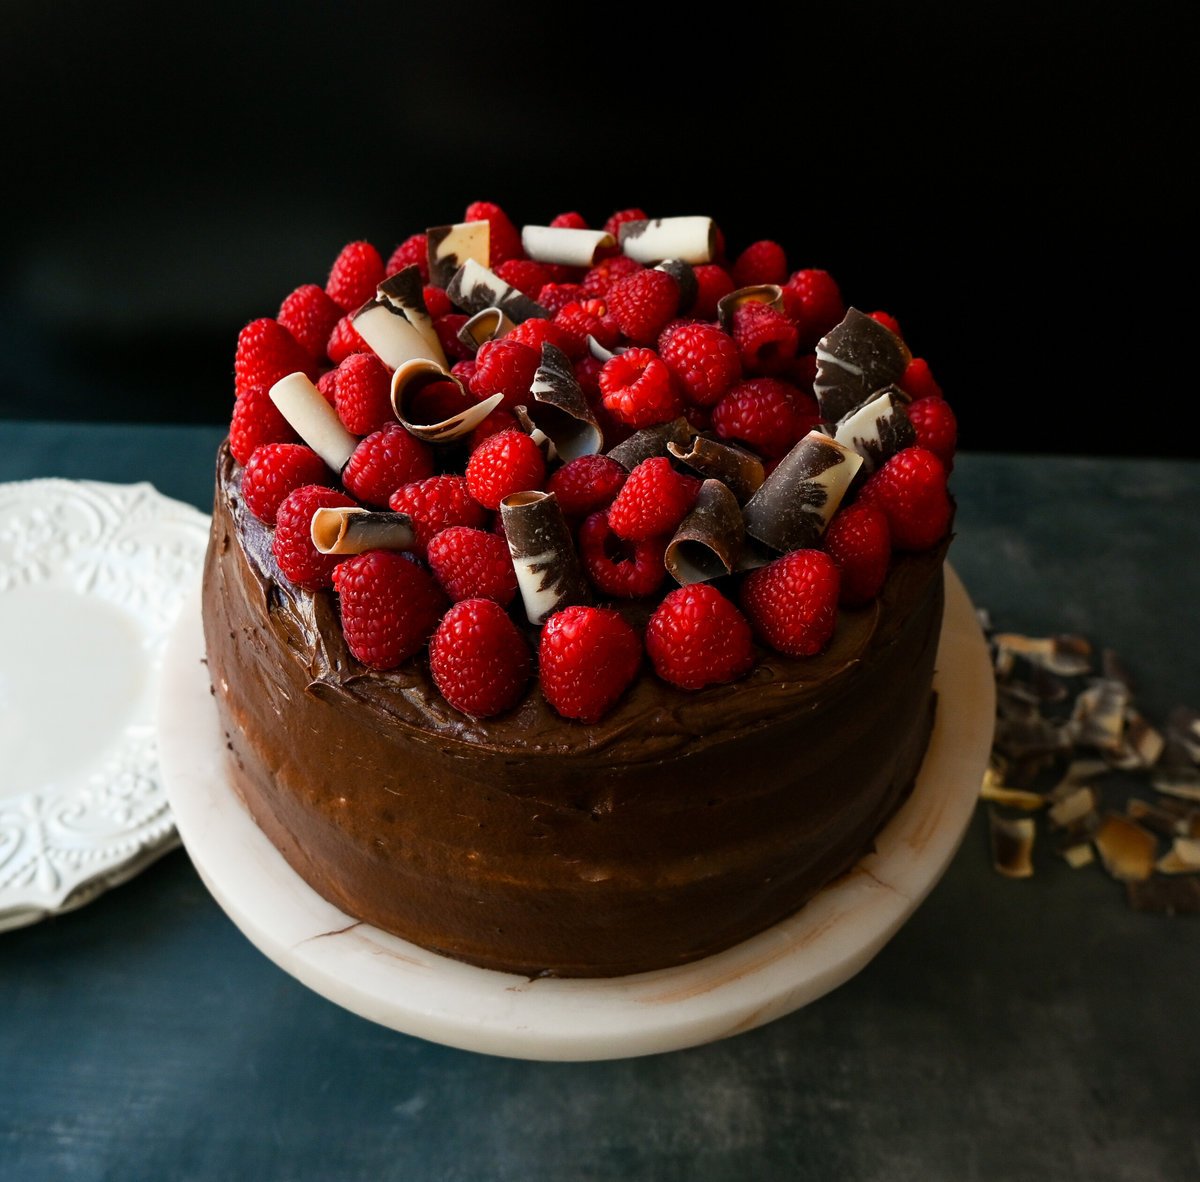 This is the Best Chocolate Raspberry Cake Recipe. Rich layered chocolate cake with whipped cream cheese raspberry filling, topped with creamy chocolate buttercream frosting and fresh raspberries. 